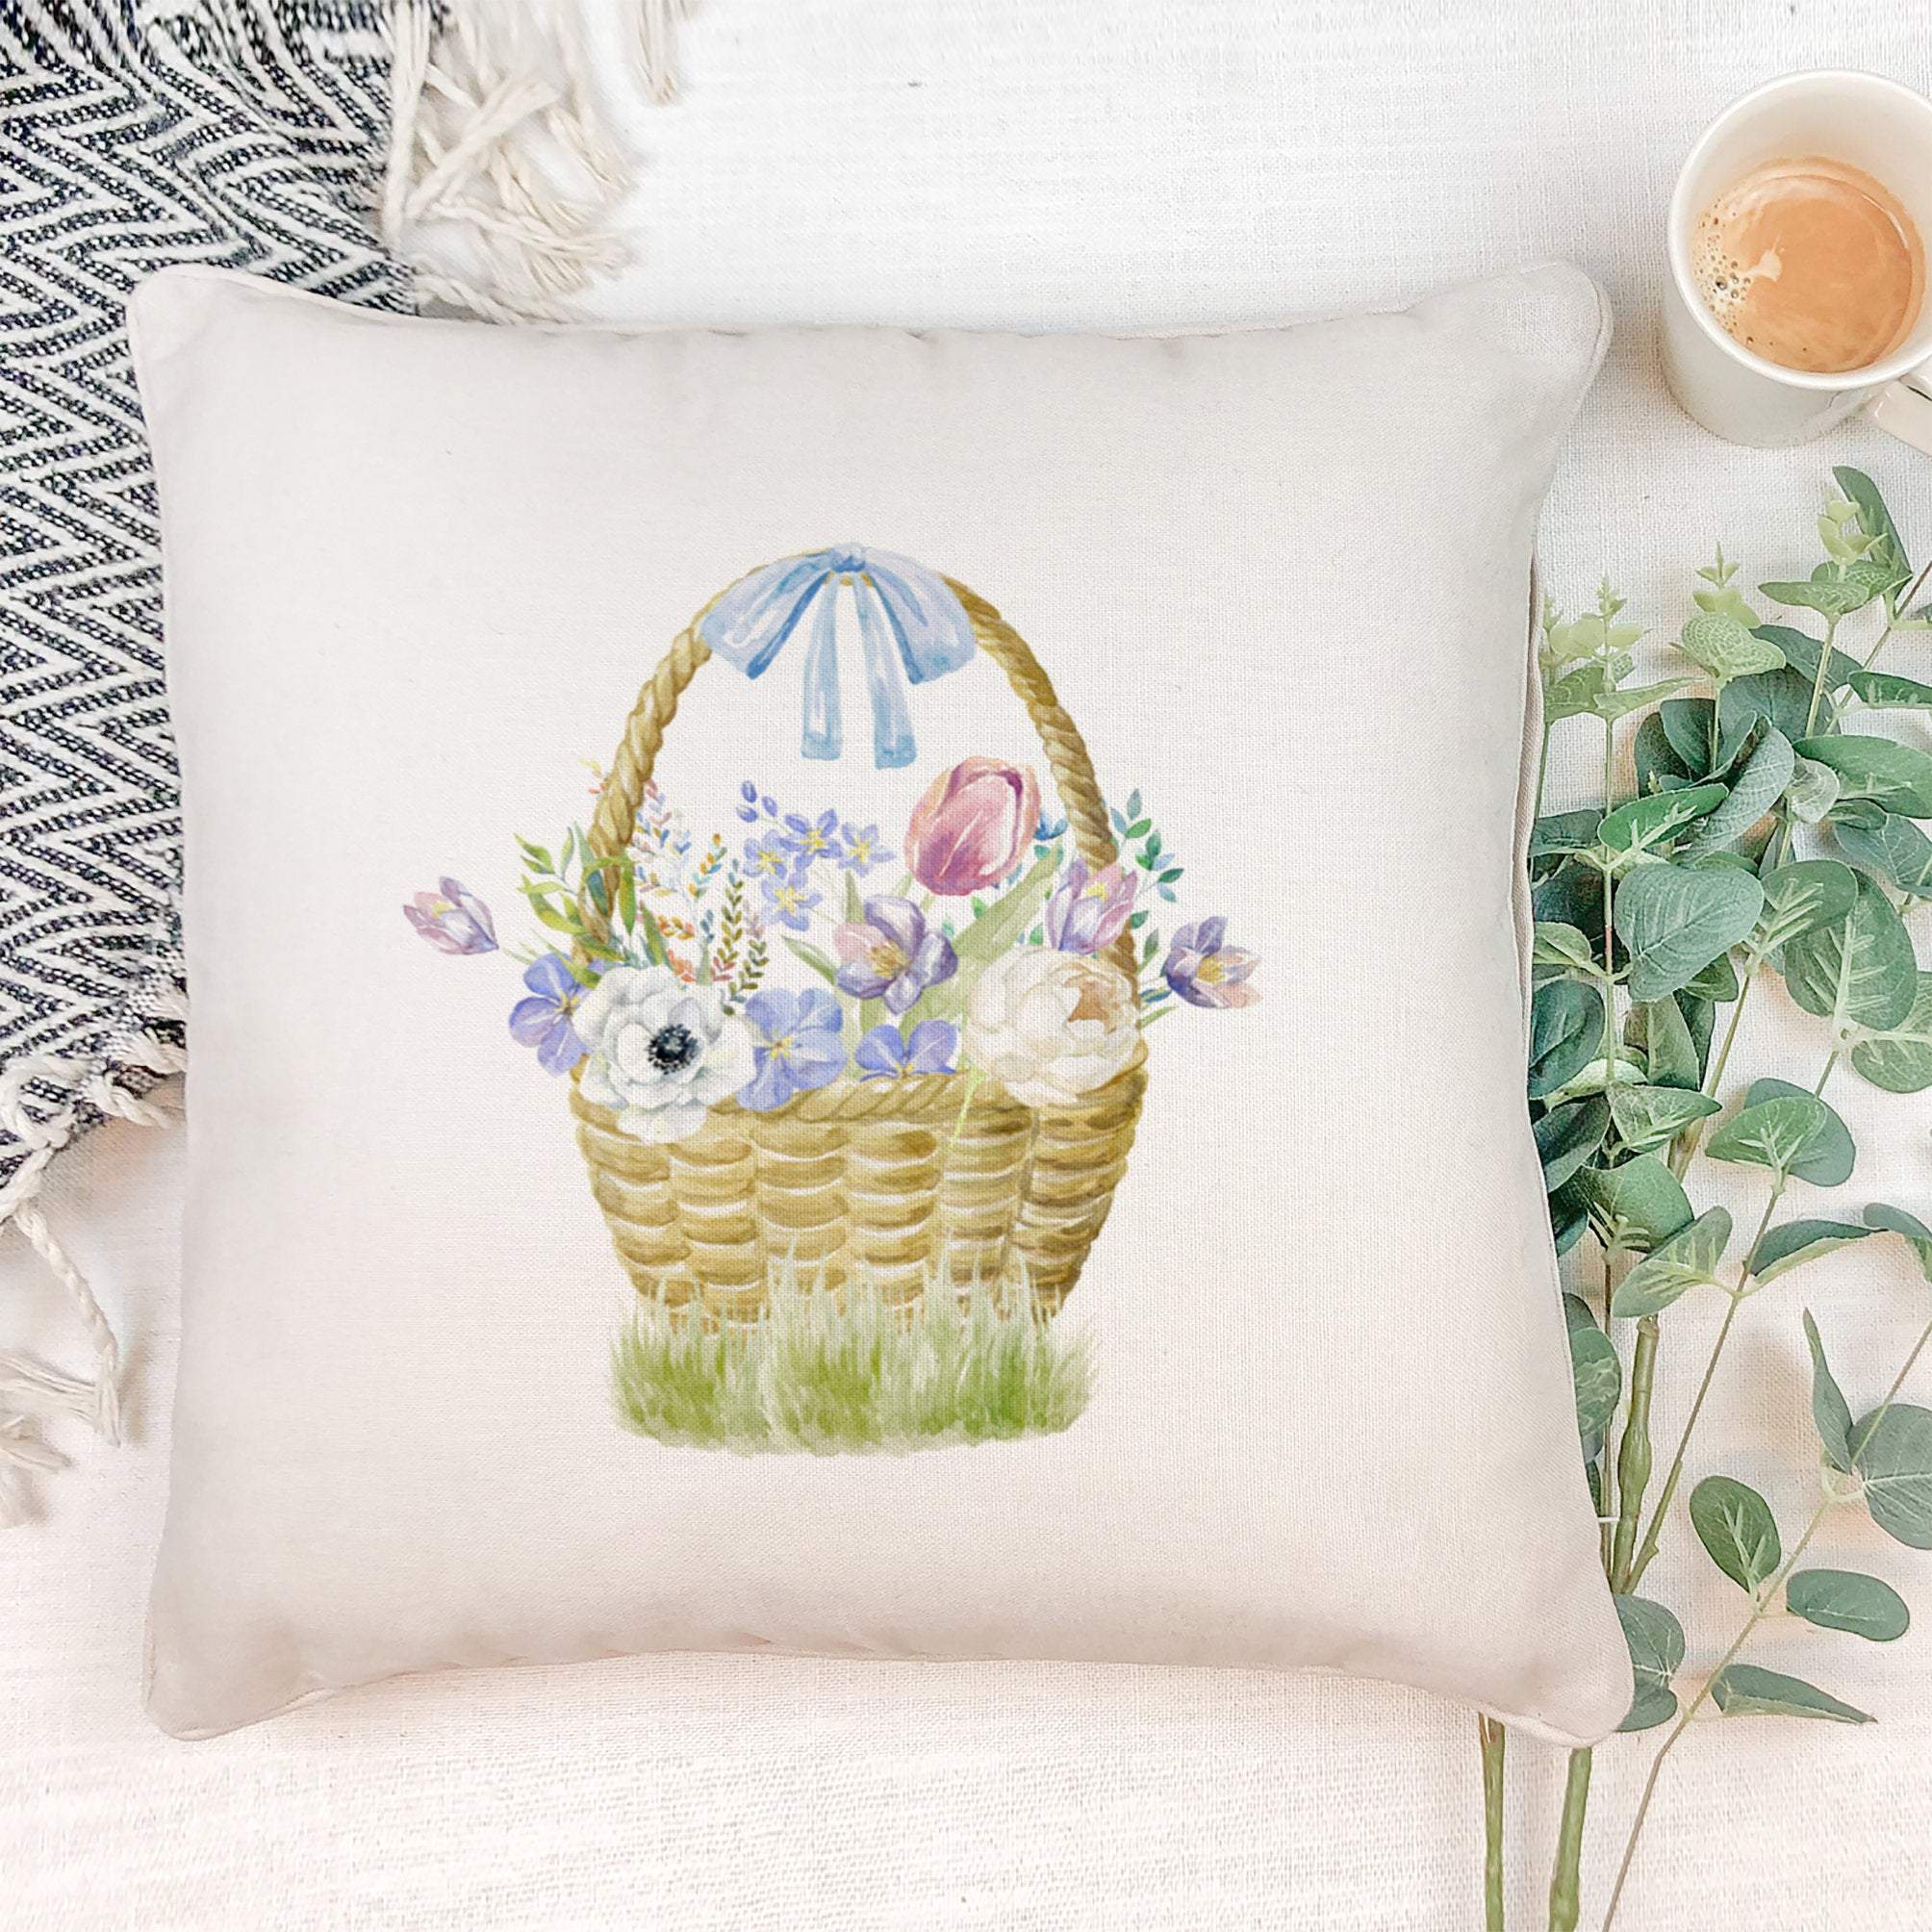 Flower basket cushion, Easter decor, Spring concept decoration, Bunny, flowers basket, Happy Easter pillow cover